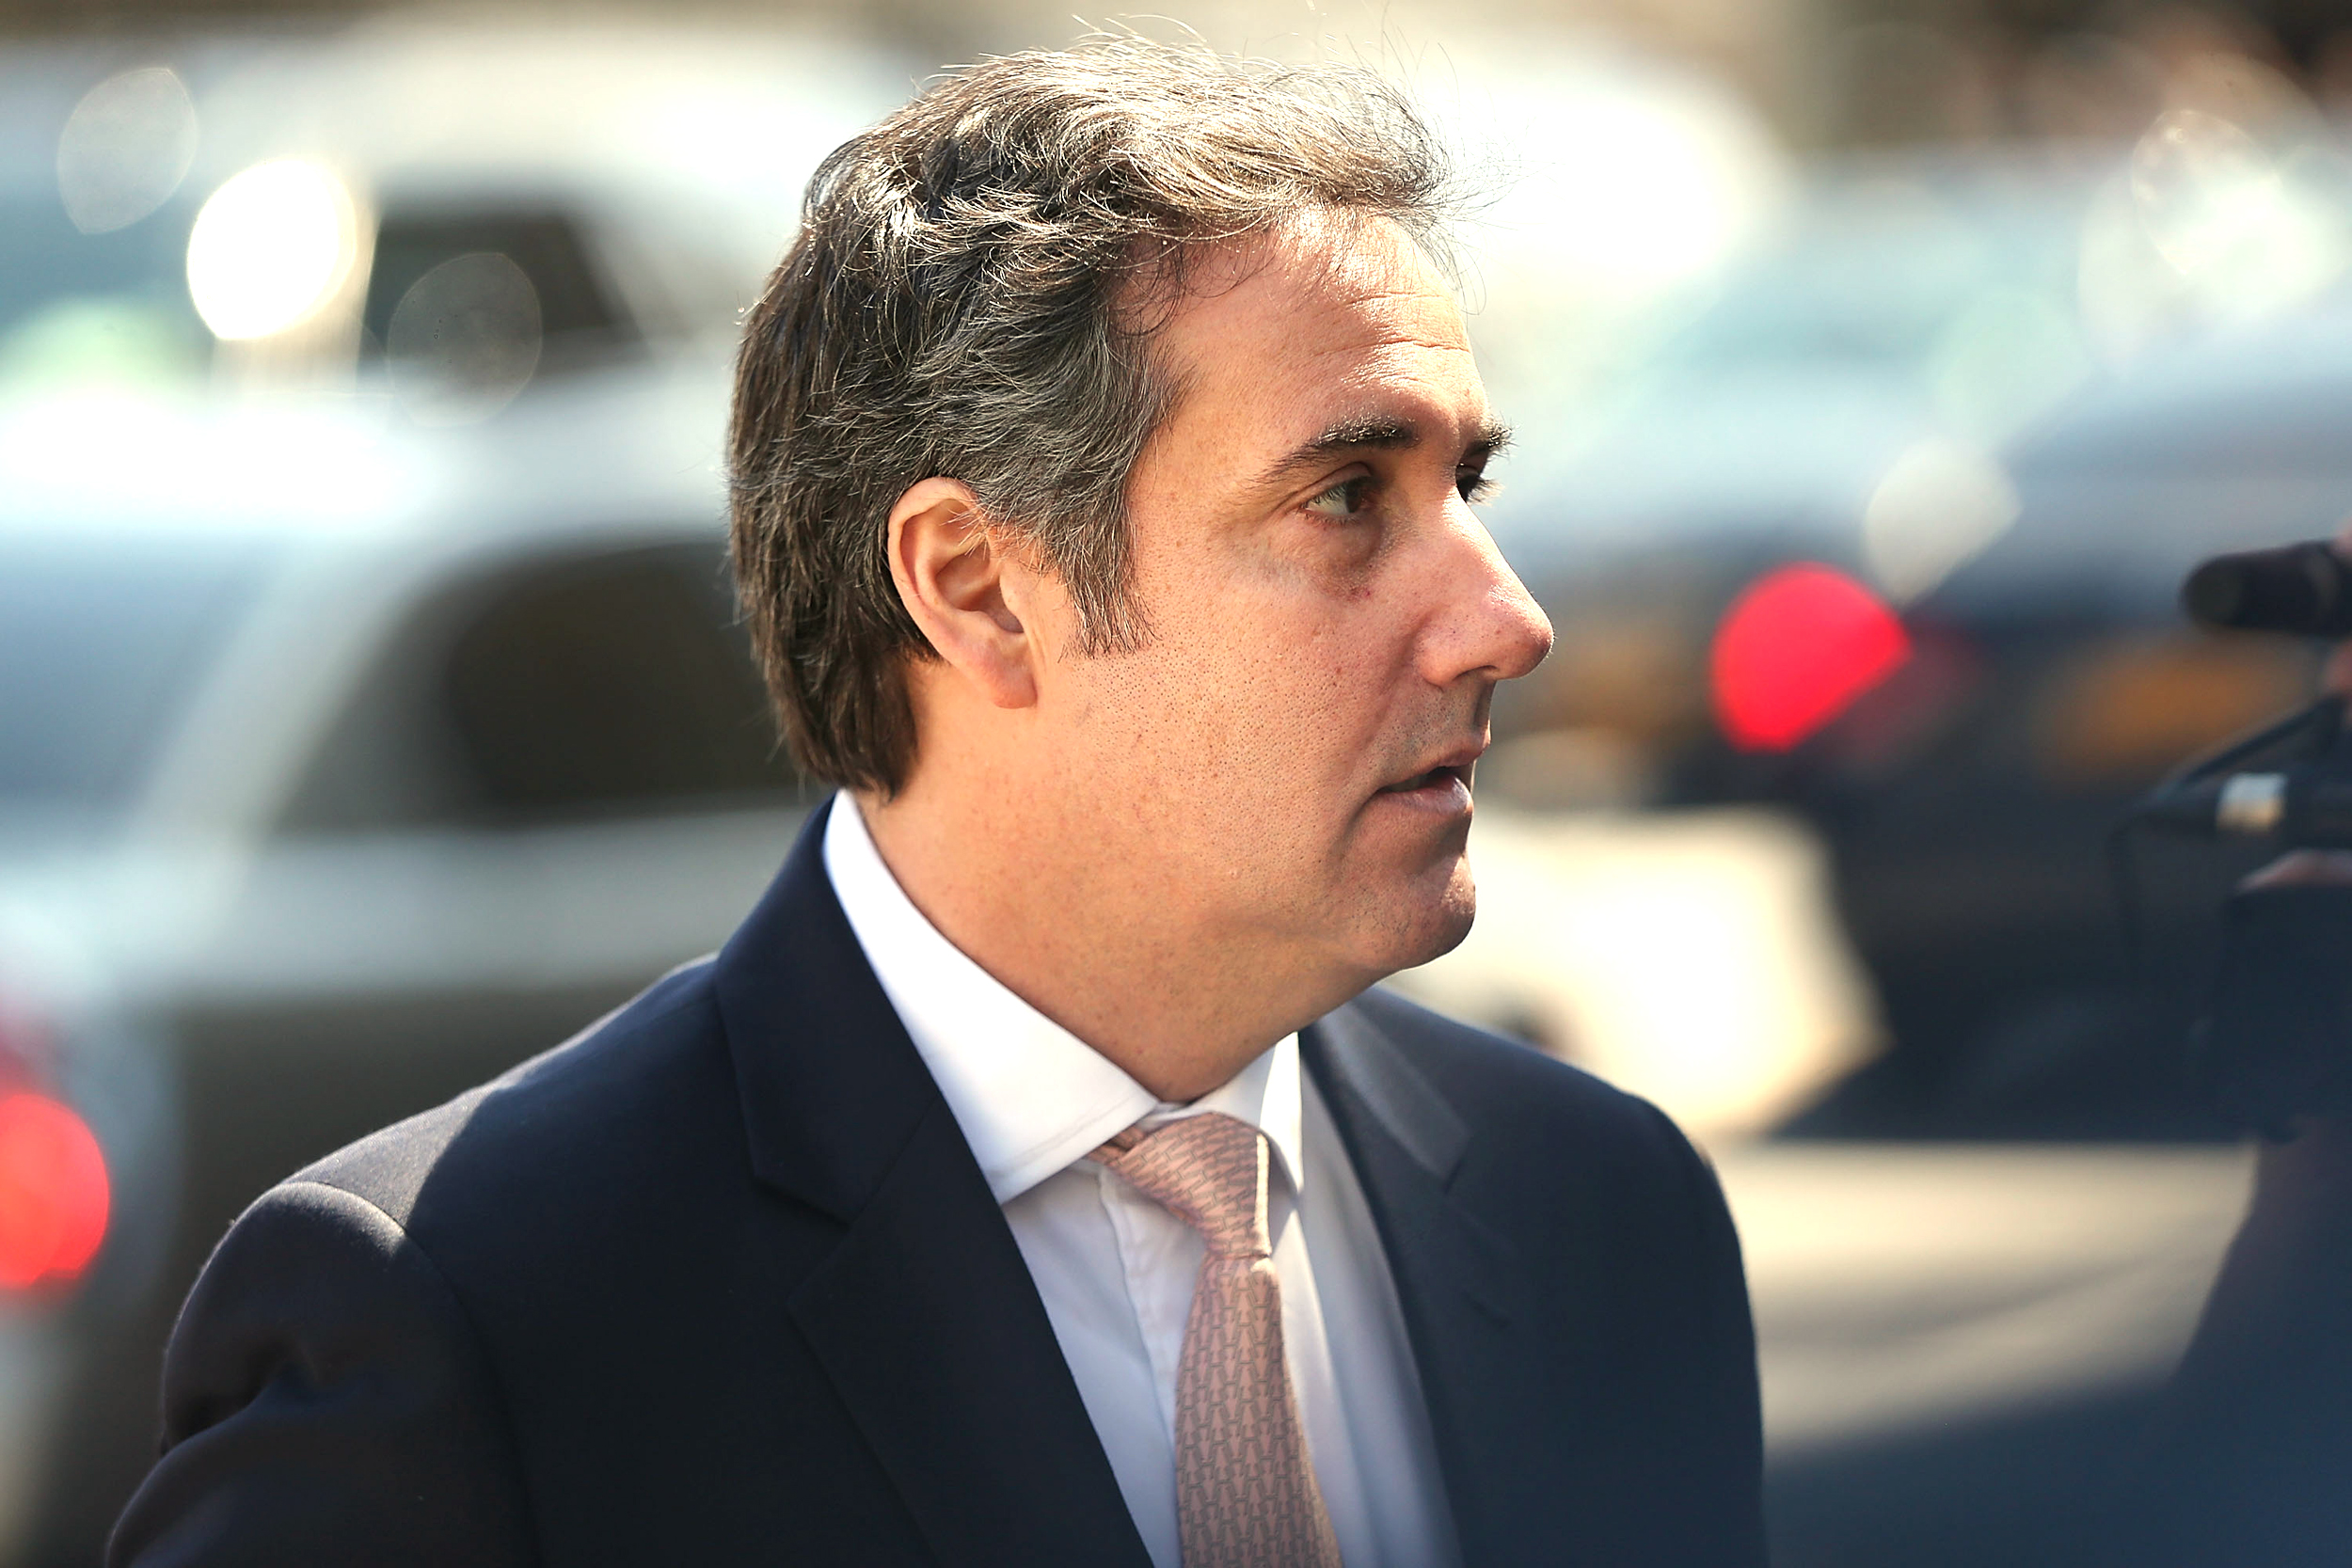 PHOTO: Michael Cohen, longtime personal lawyer and confidante for President Donald Trump, arrives at the U.S. District Court Southern District of New York on April 26, 2018 in New York City. 